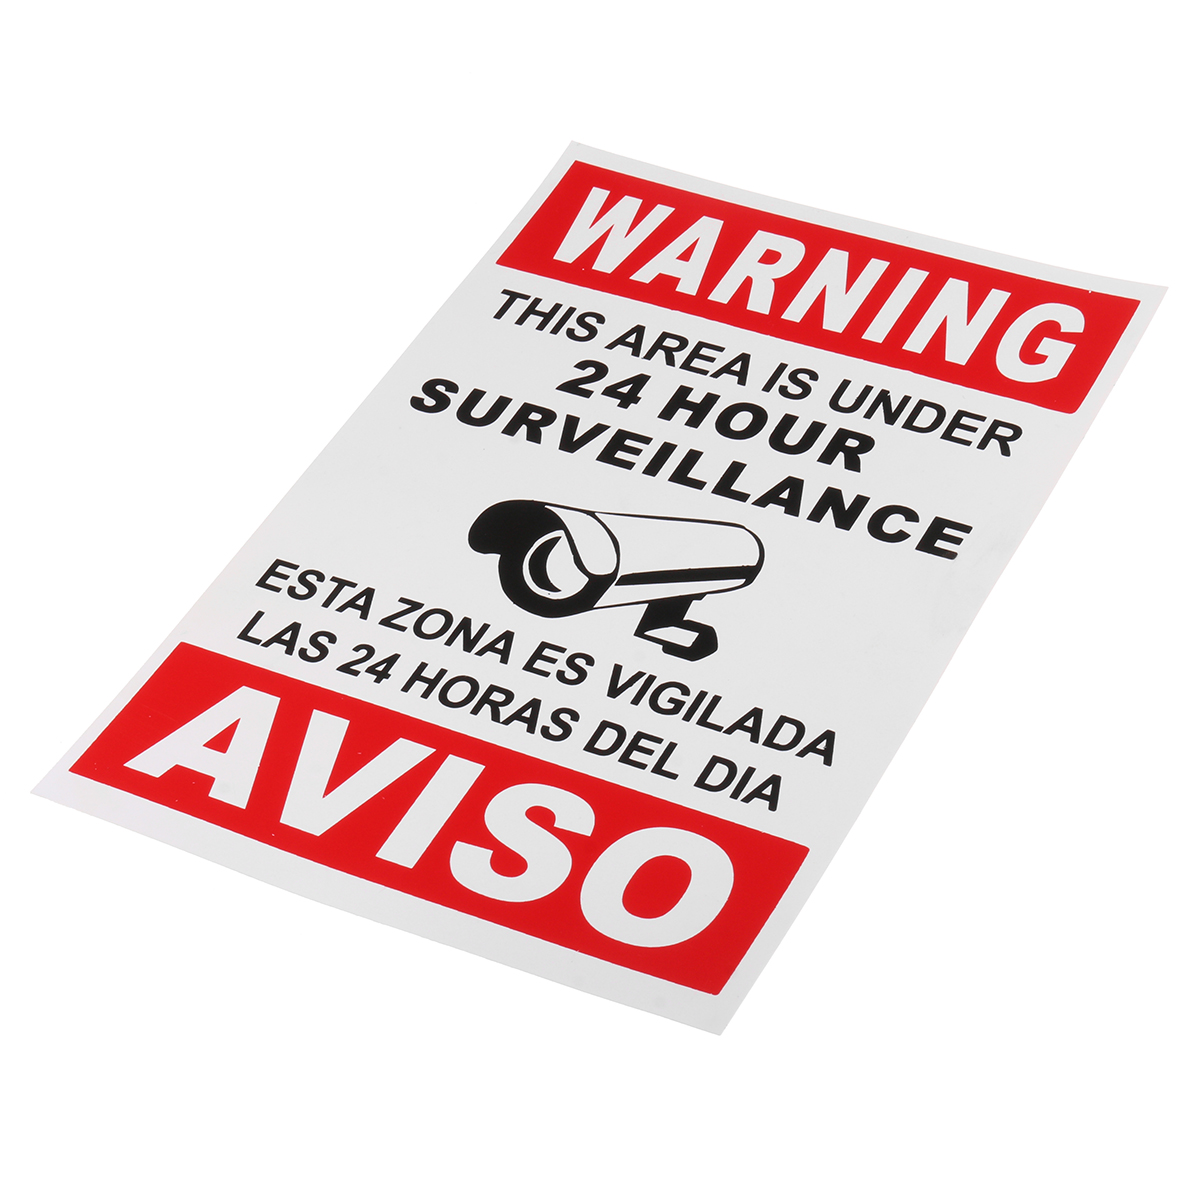 English-Spanish-Security-Warning-Sign-Camera-Sticker-Warning-This-Area-Is-Under-24-Hour-Surveillance-1180753-5